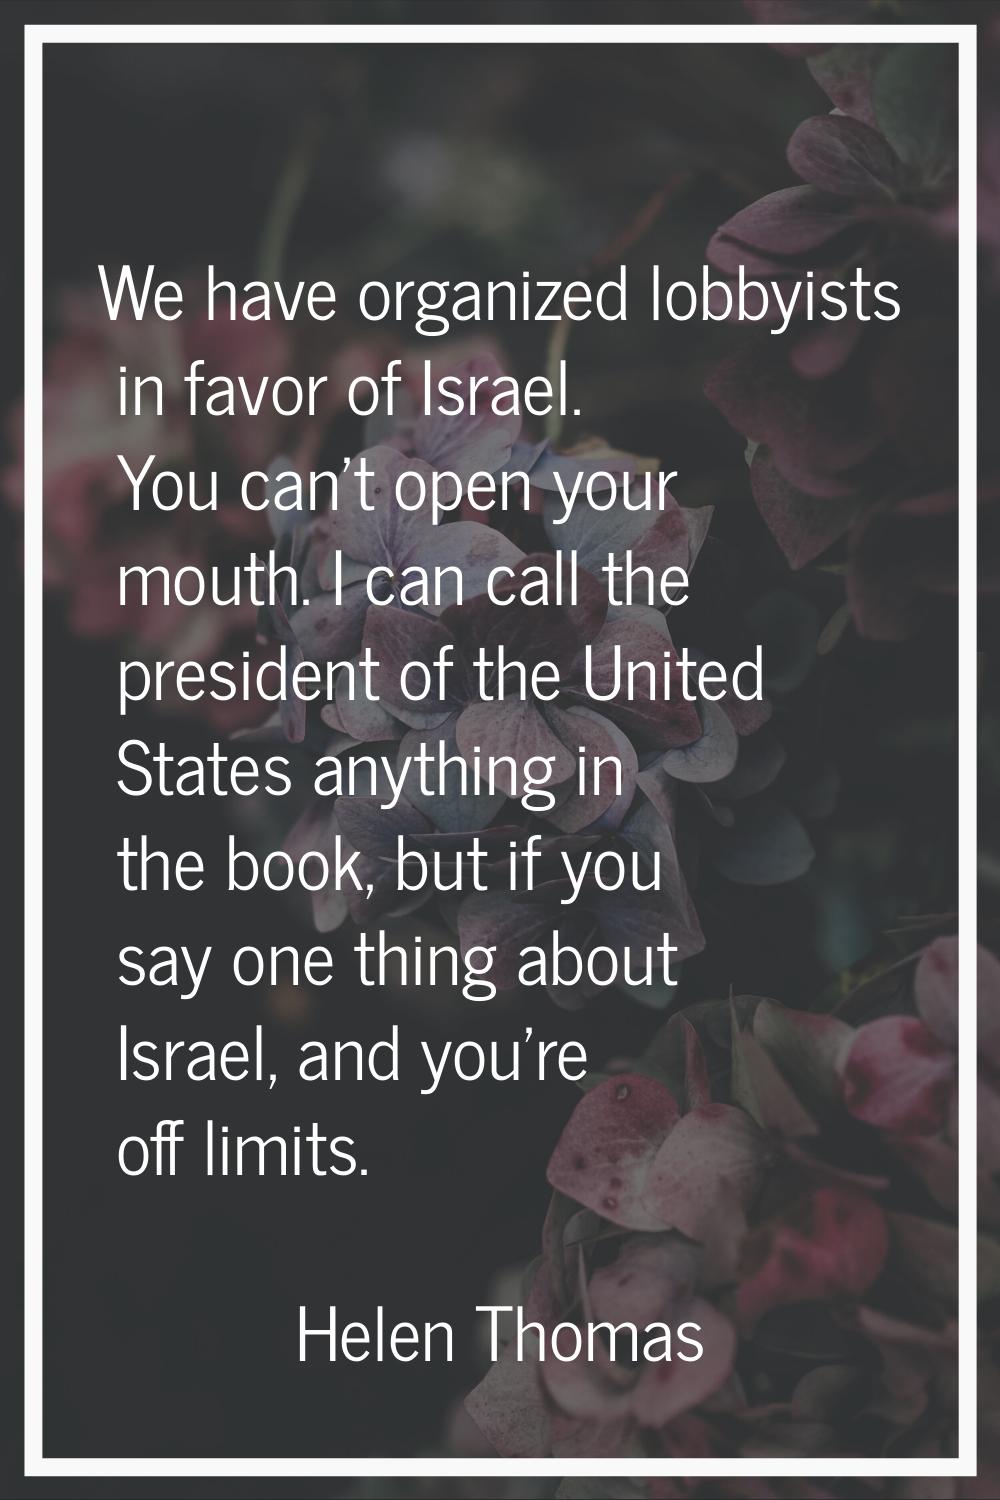 We have organized lobbyists in favor of Israel. You can't open your mouth. I can call the president